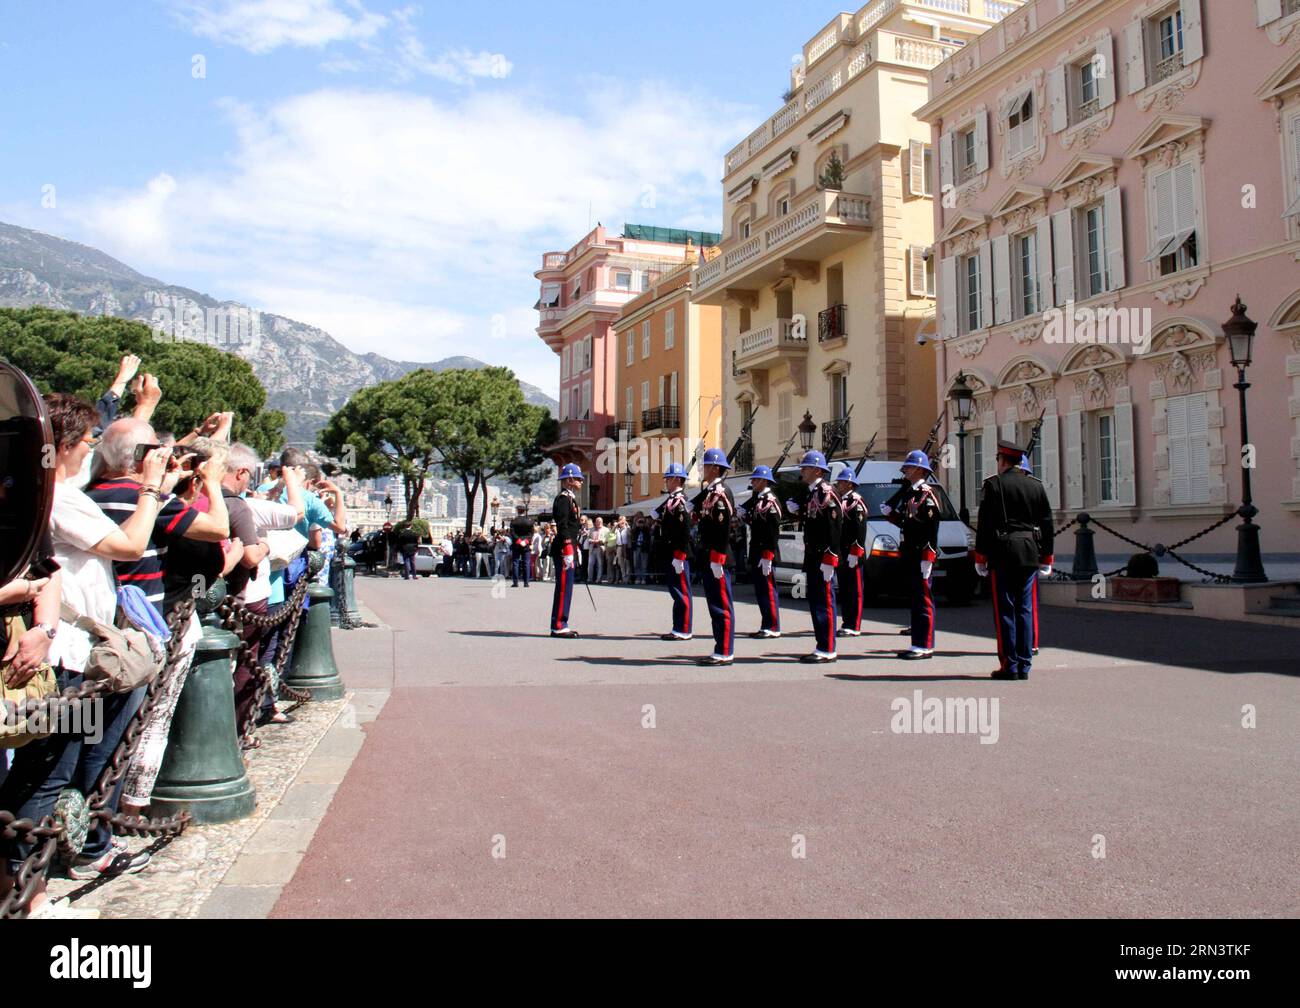 (150426) -- MONACO, April 26, 2015 -- Photo taken on April 23, 2015 shows royal guards of Monaco preparing to attend the guard changing ceremony on the Palace Square of Monaco. The traditional guard changing ceremony of Monaco is held at 11:55 a.m. on the Palace Square everyday. ) MONACO-GUARD CHANGING CEREMONY ZhengxBin PUBLICATIONxNOTxINxCHN   Monaco April 26 2015 Photo Taken ON April 23 2015 Shows Royal Guards of Monaco Preparing to attend The Guard Changing Ceremony ON The Palace Square of Monaco The Traditional Guard Changing Ceremony of Monaco IS Hero AT 11 55 a M ON The Palace Square ev Stock Photo